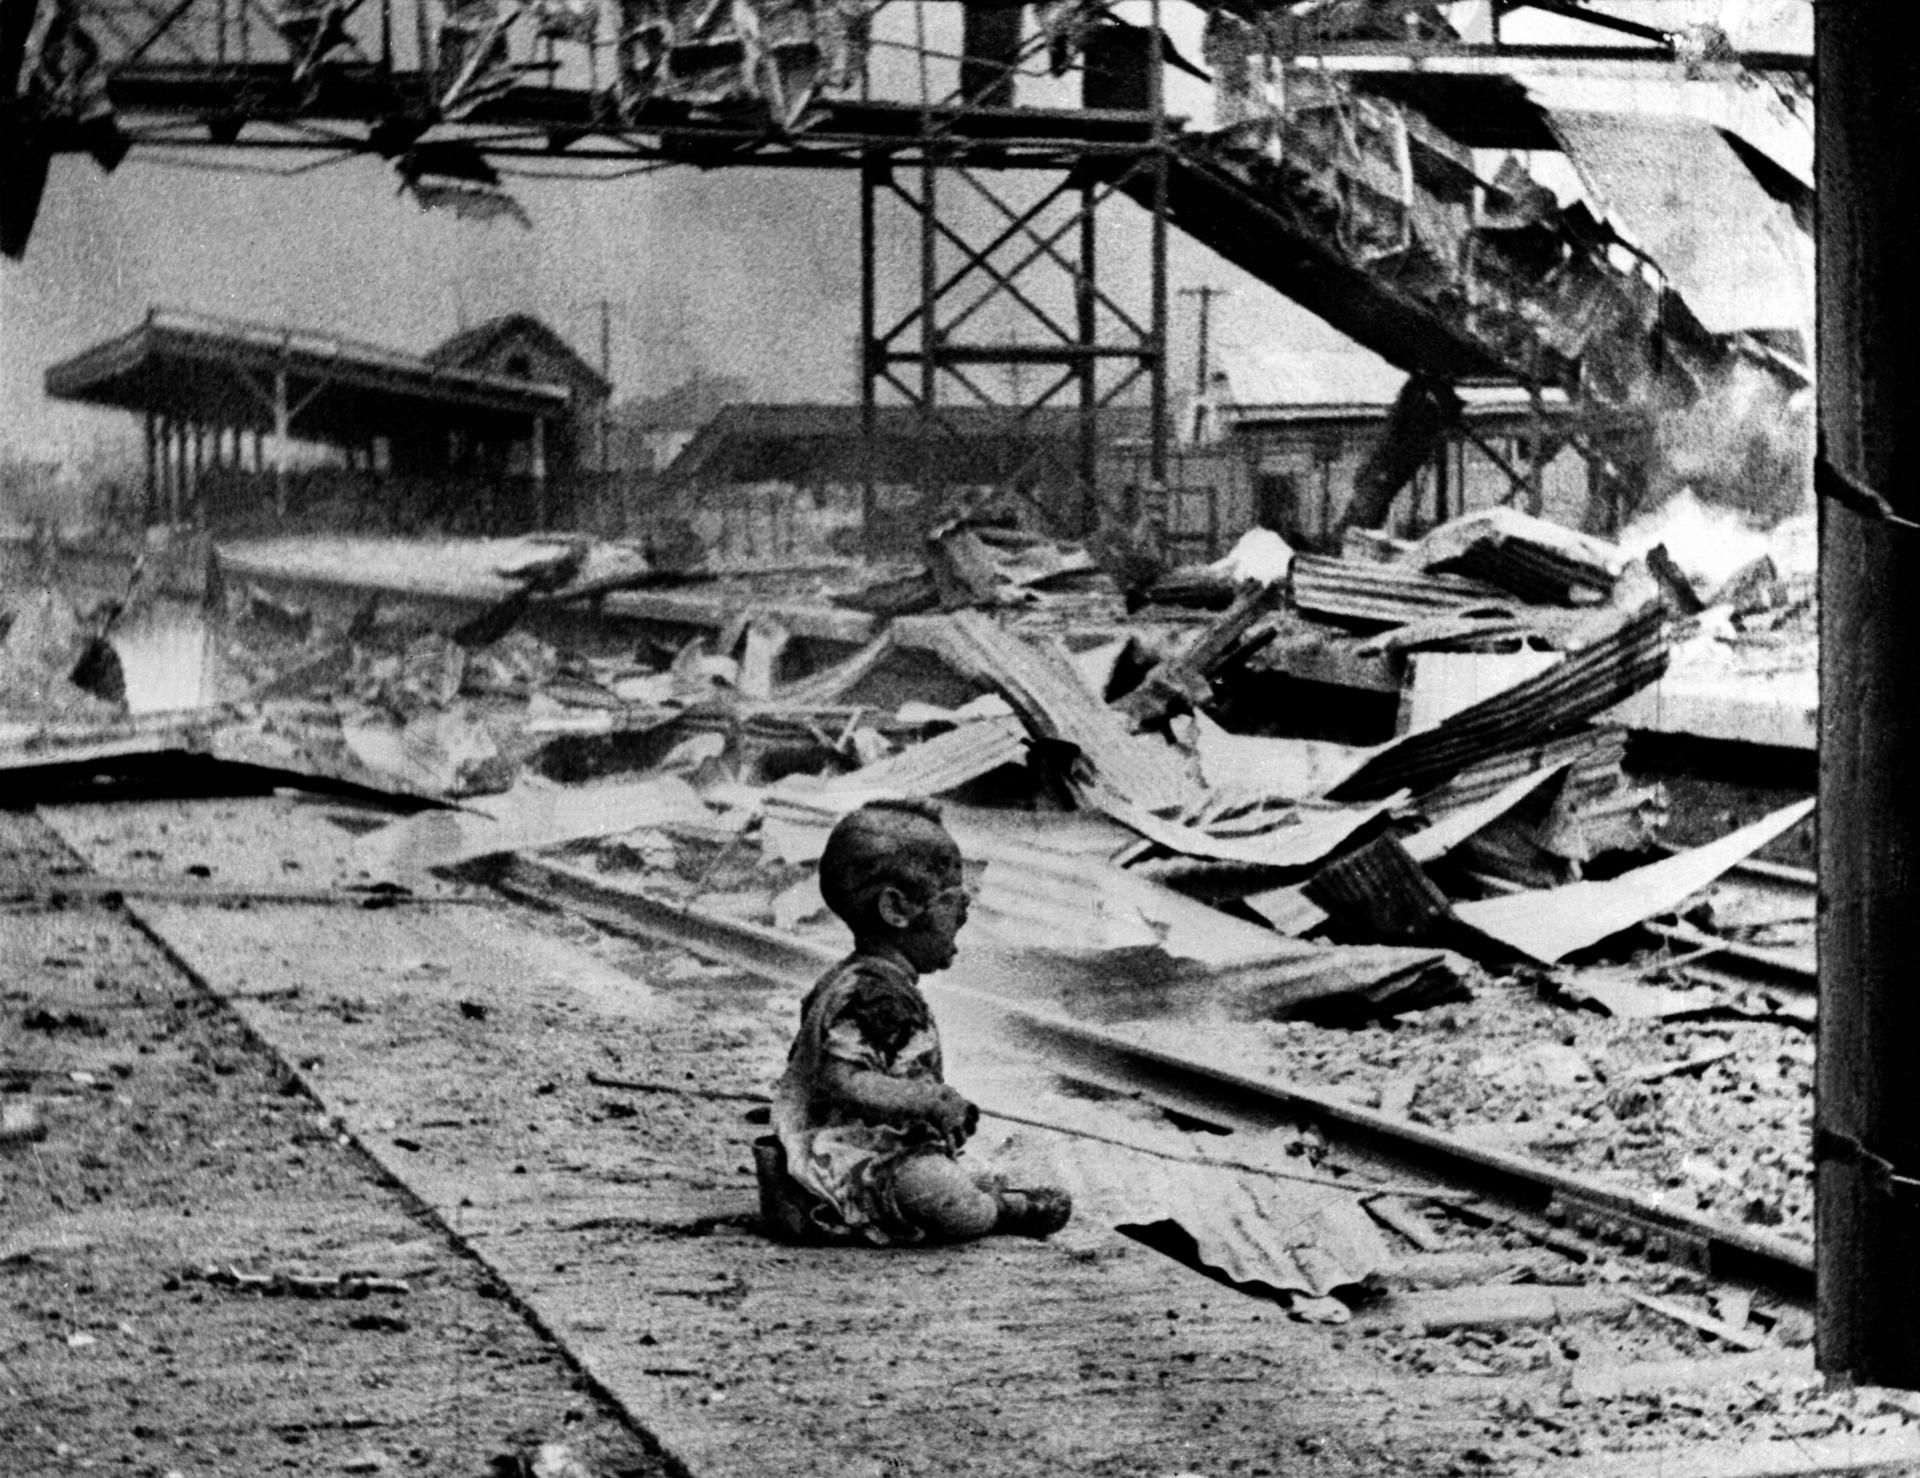 A child cries amid the devastation of a bombing raid on Shanghai during the Sino-Japanese war, part of the backdrop toThe Lius of Shanghai.Photo: AP